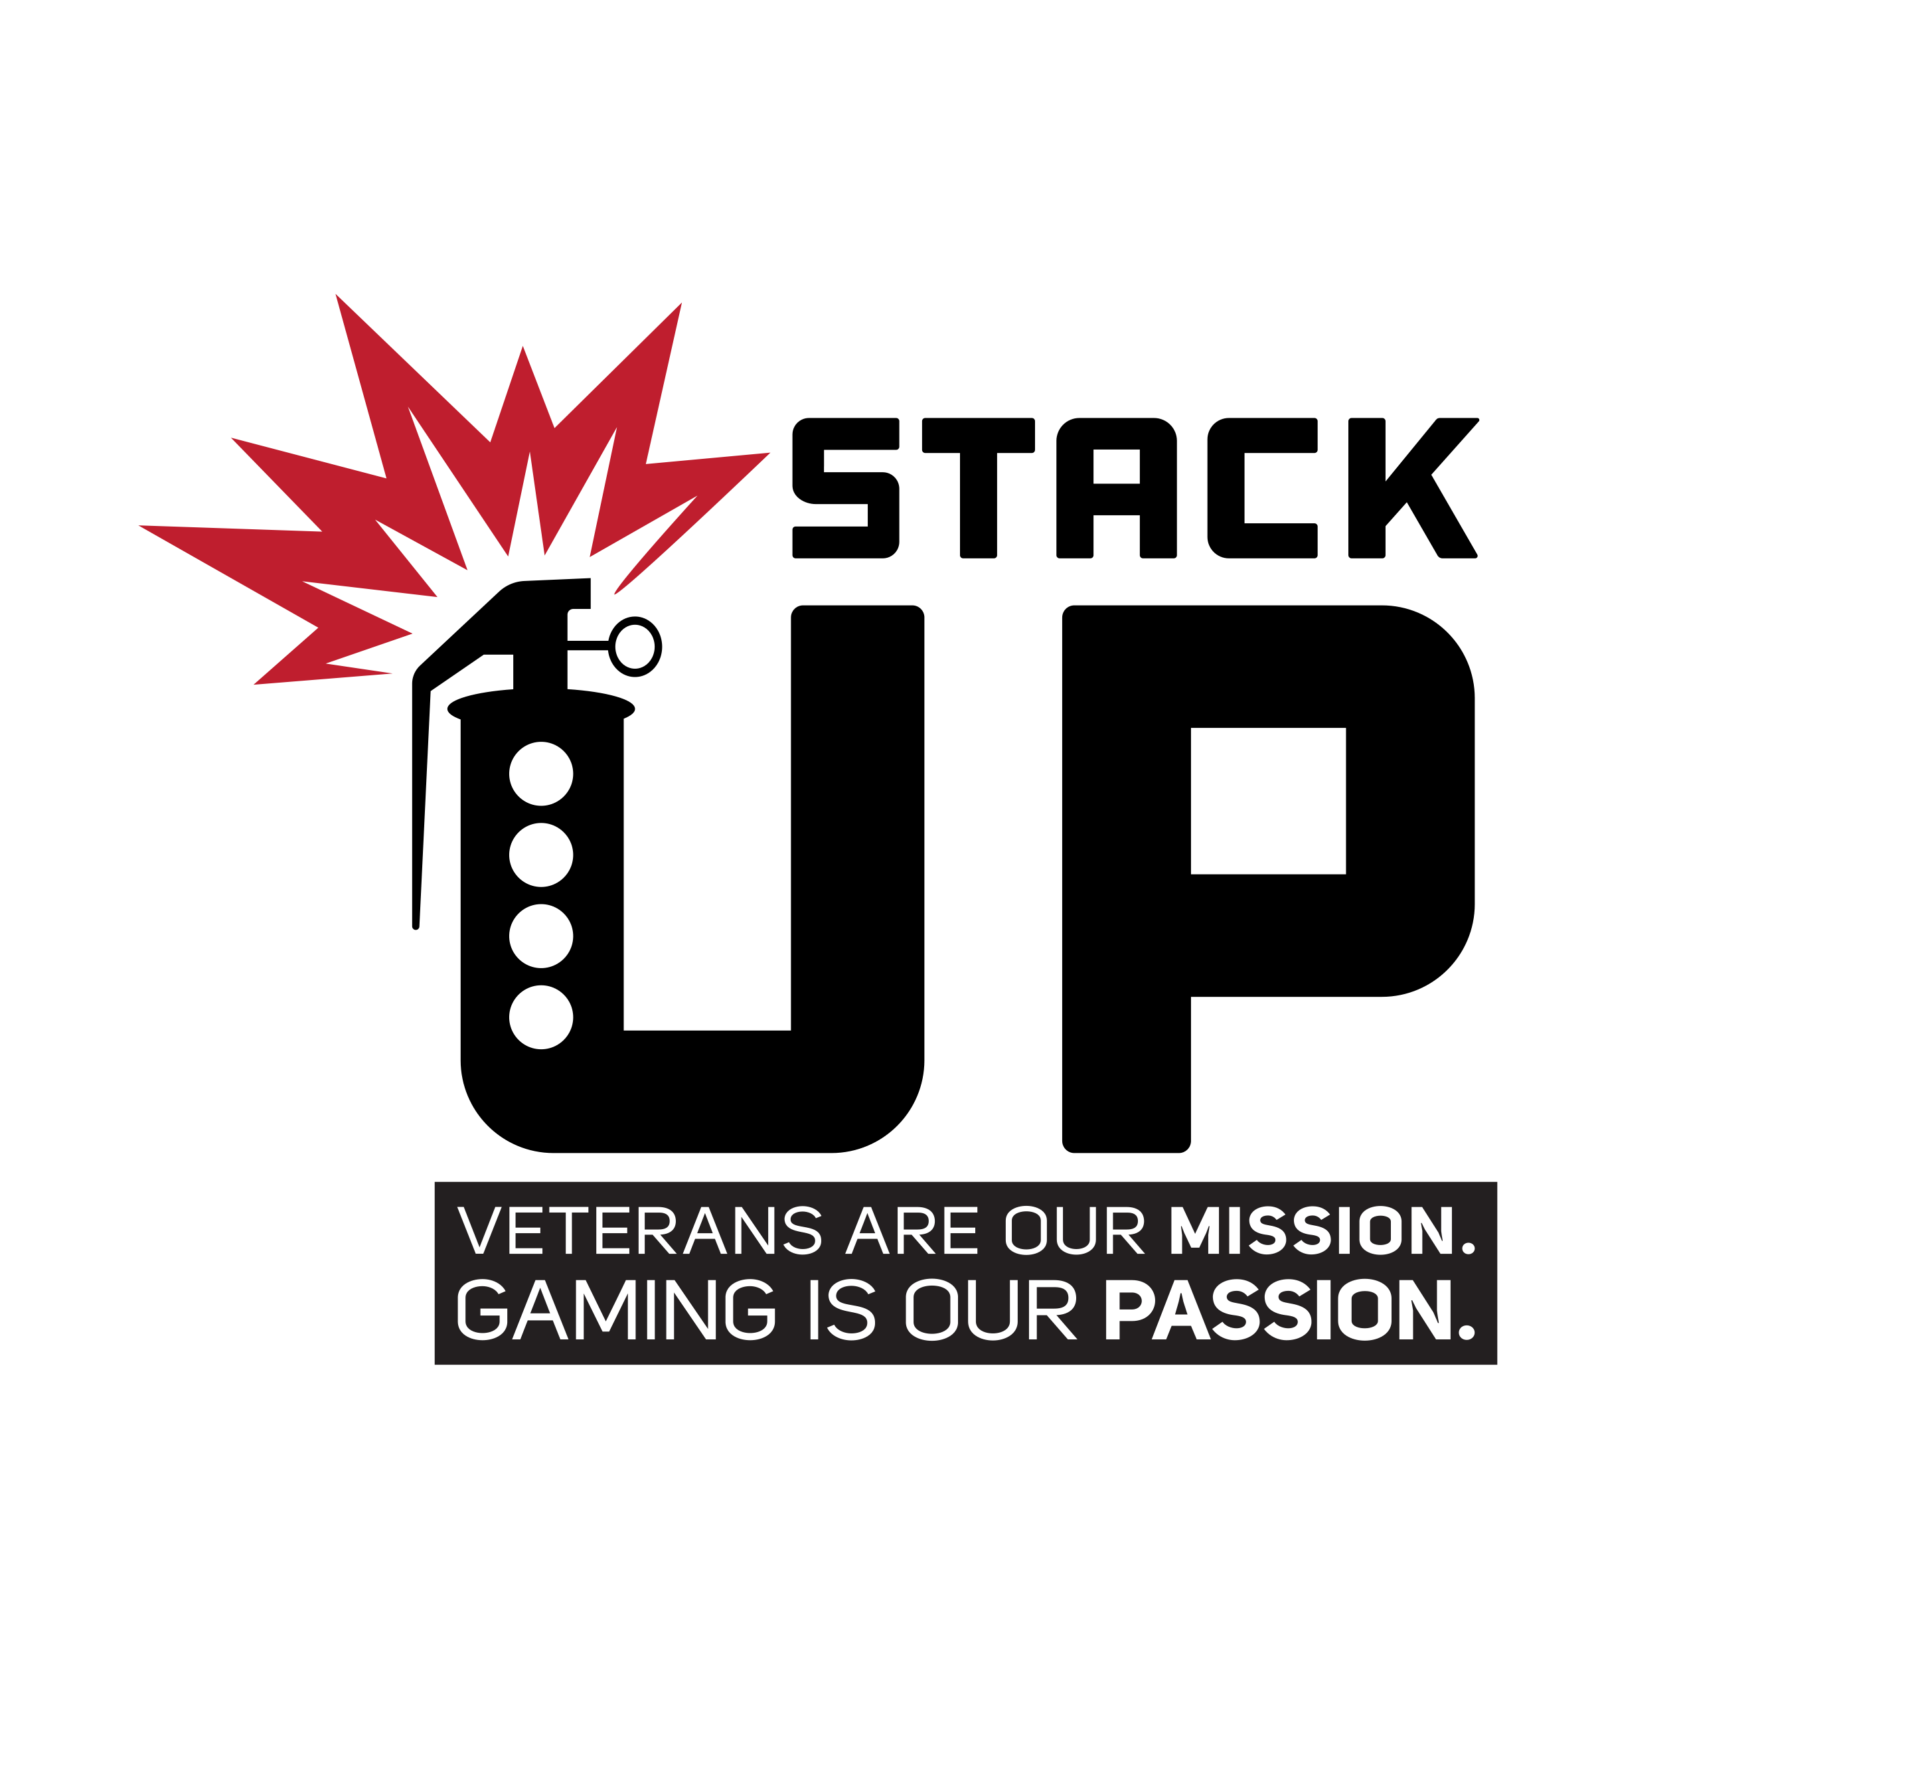 The logo for Stack Up, a veteran's charity